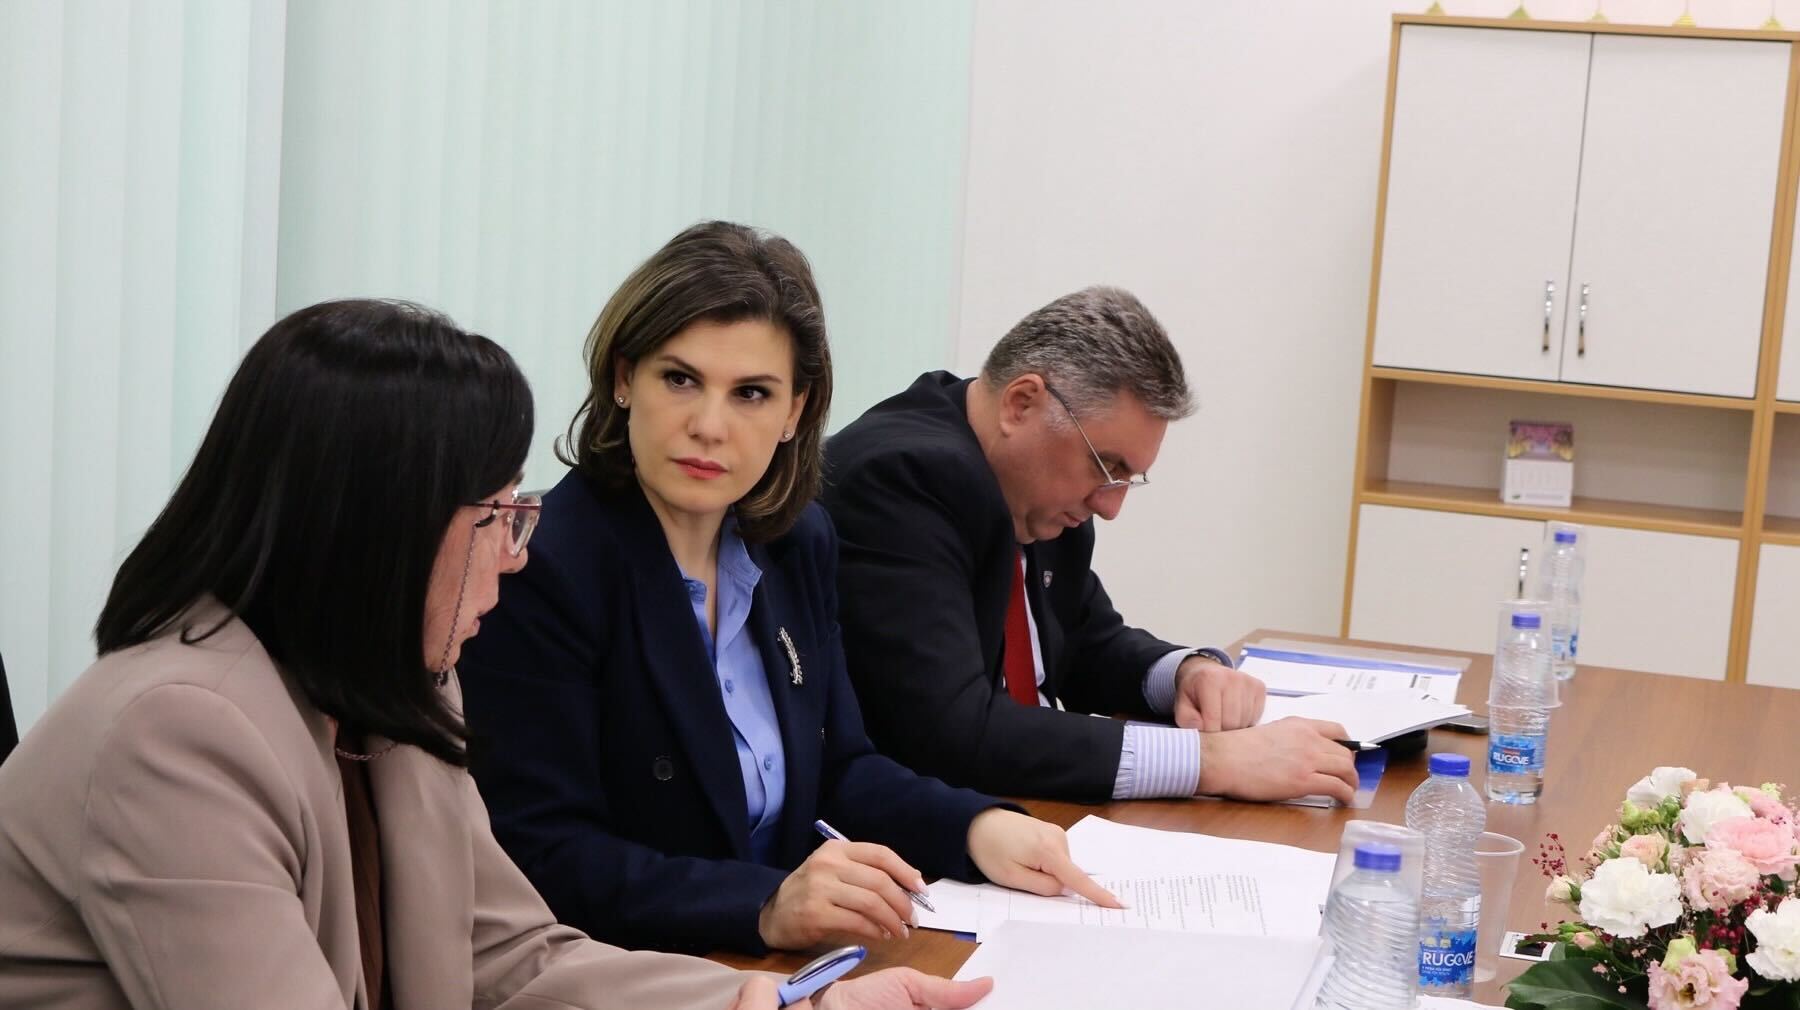 MEETING OF THE SUPERVISORY BOARD OF THE KOSOVO PROPERTY COMPARISON AND VERIFICATION AGENCY